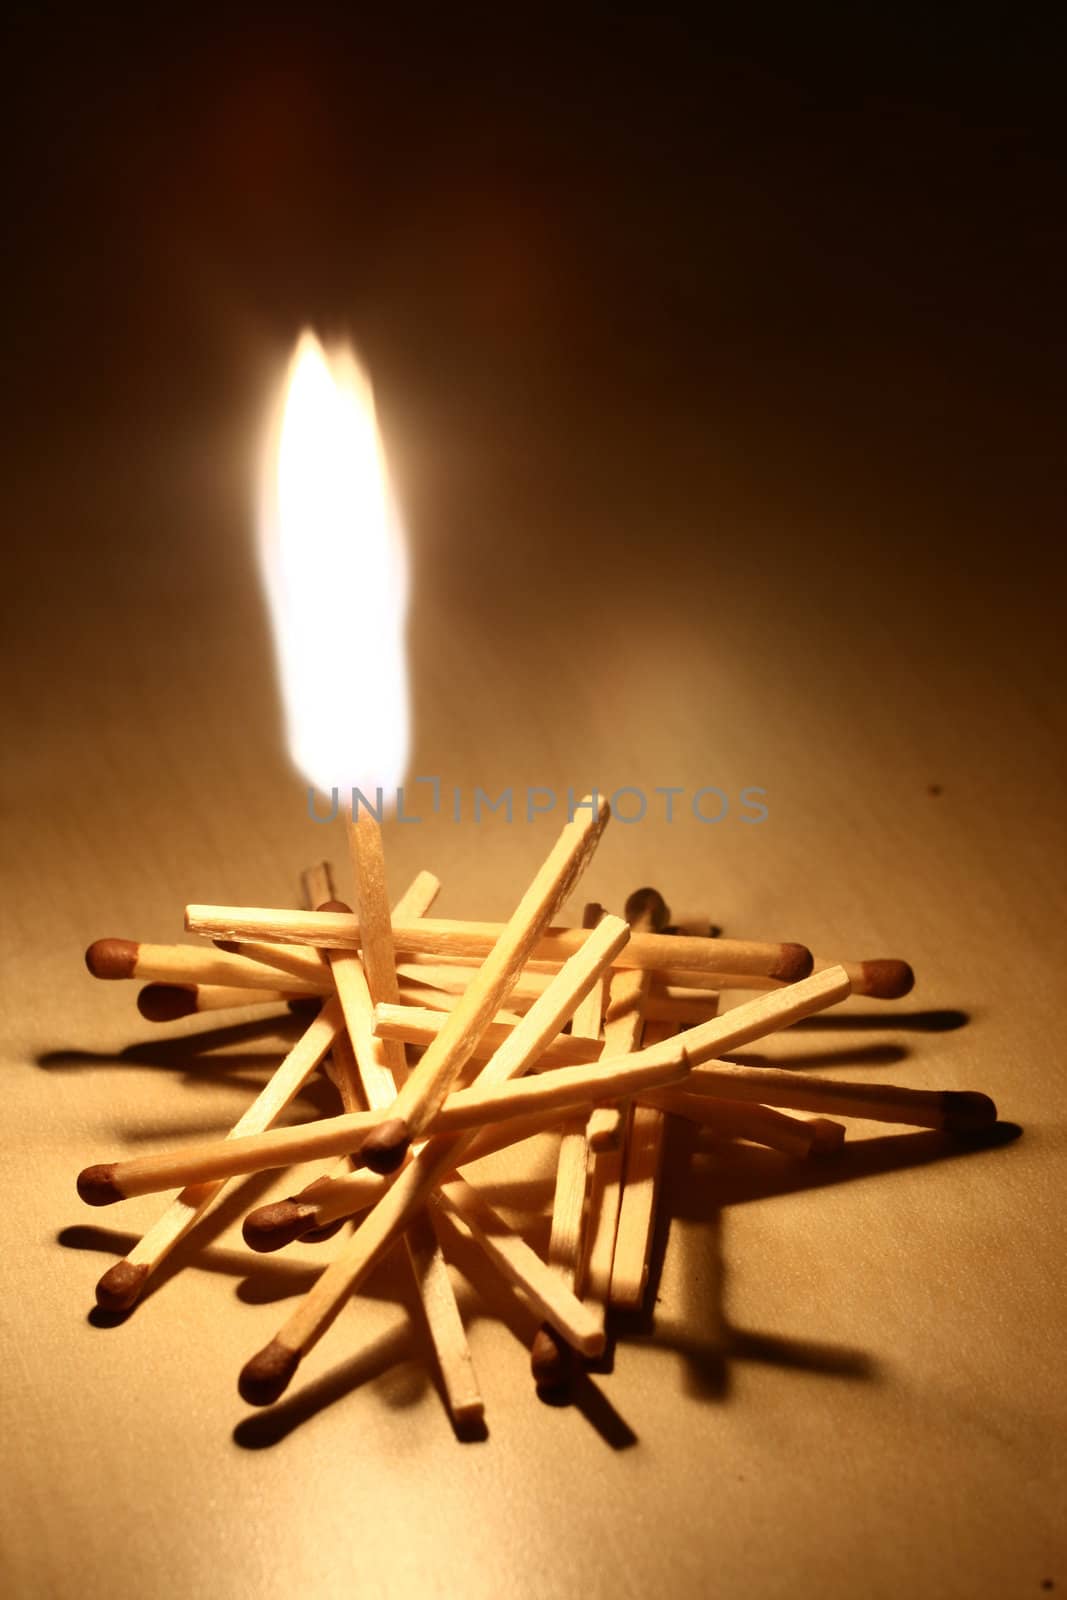 A group of matches with one of them burning